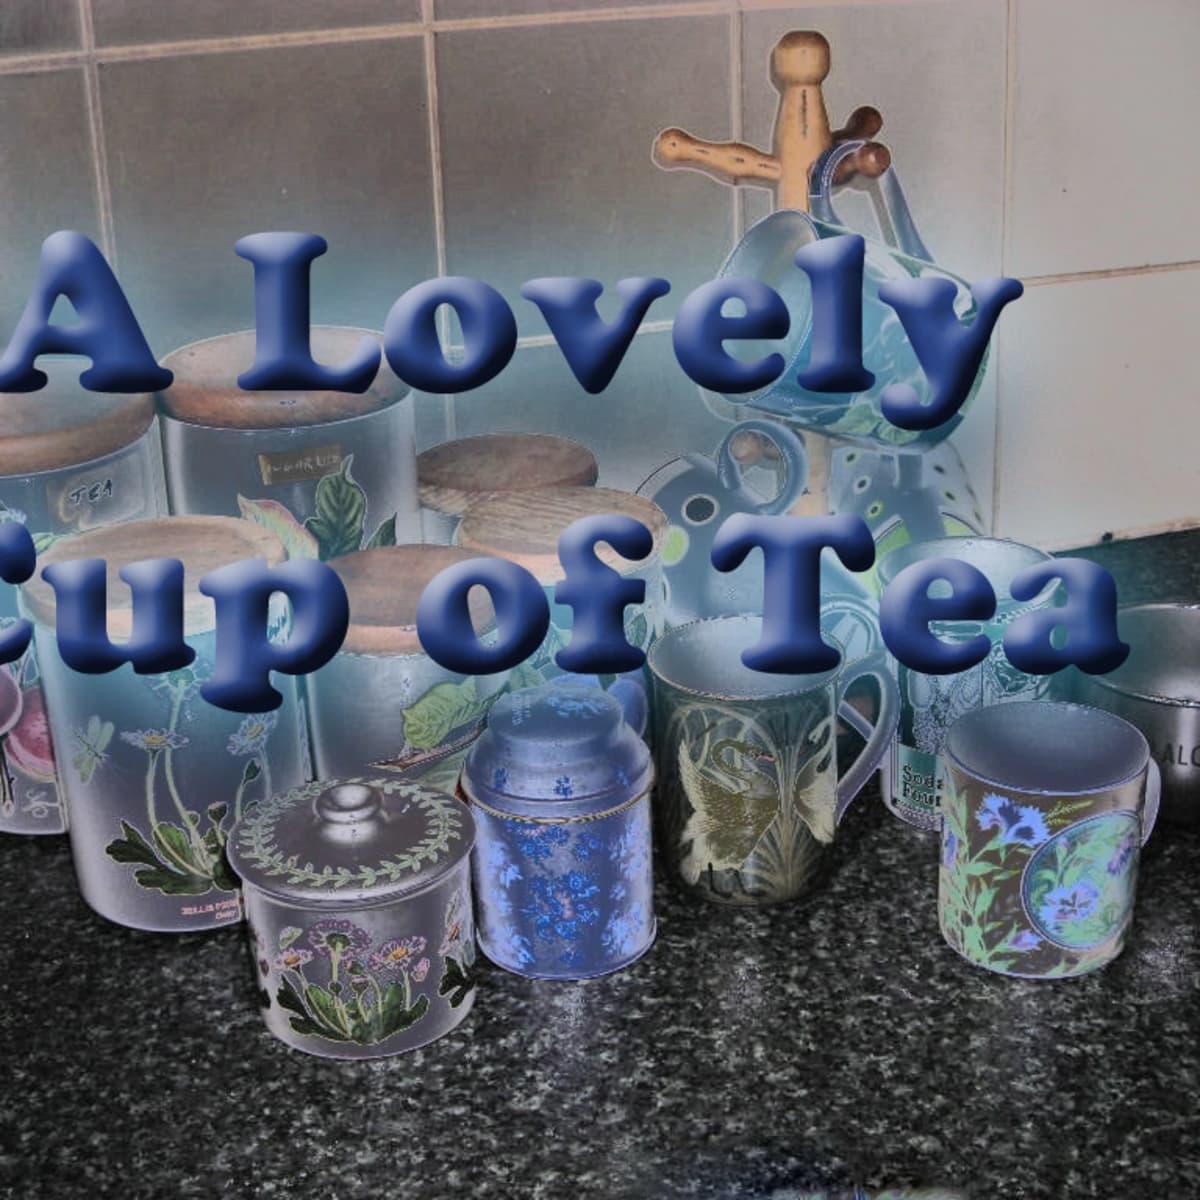 A Lovely Cup Of Tea Poetry Art And Bone China Hubpages